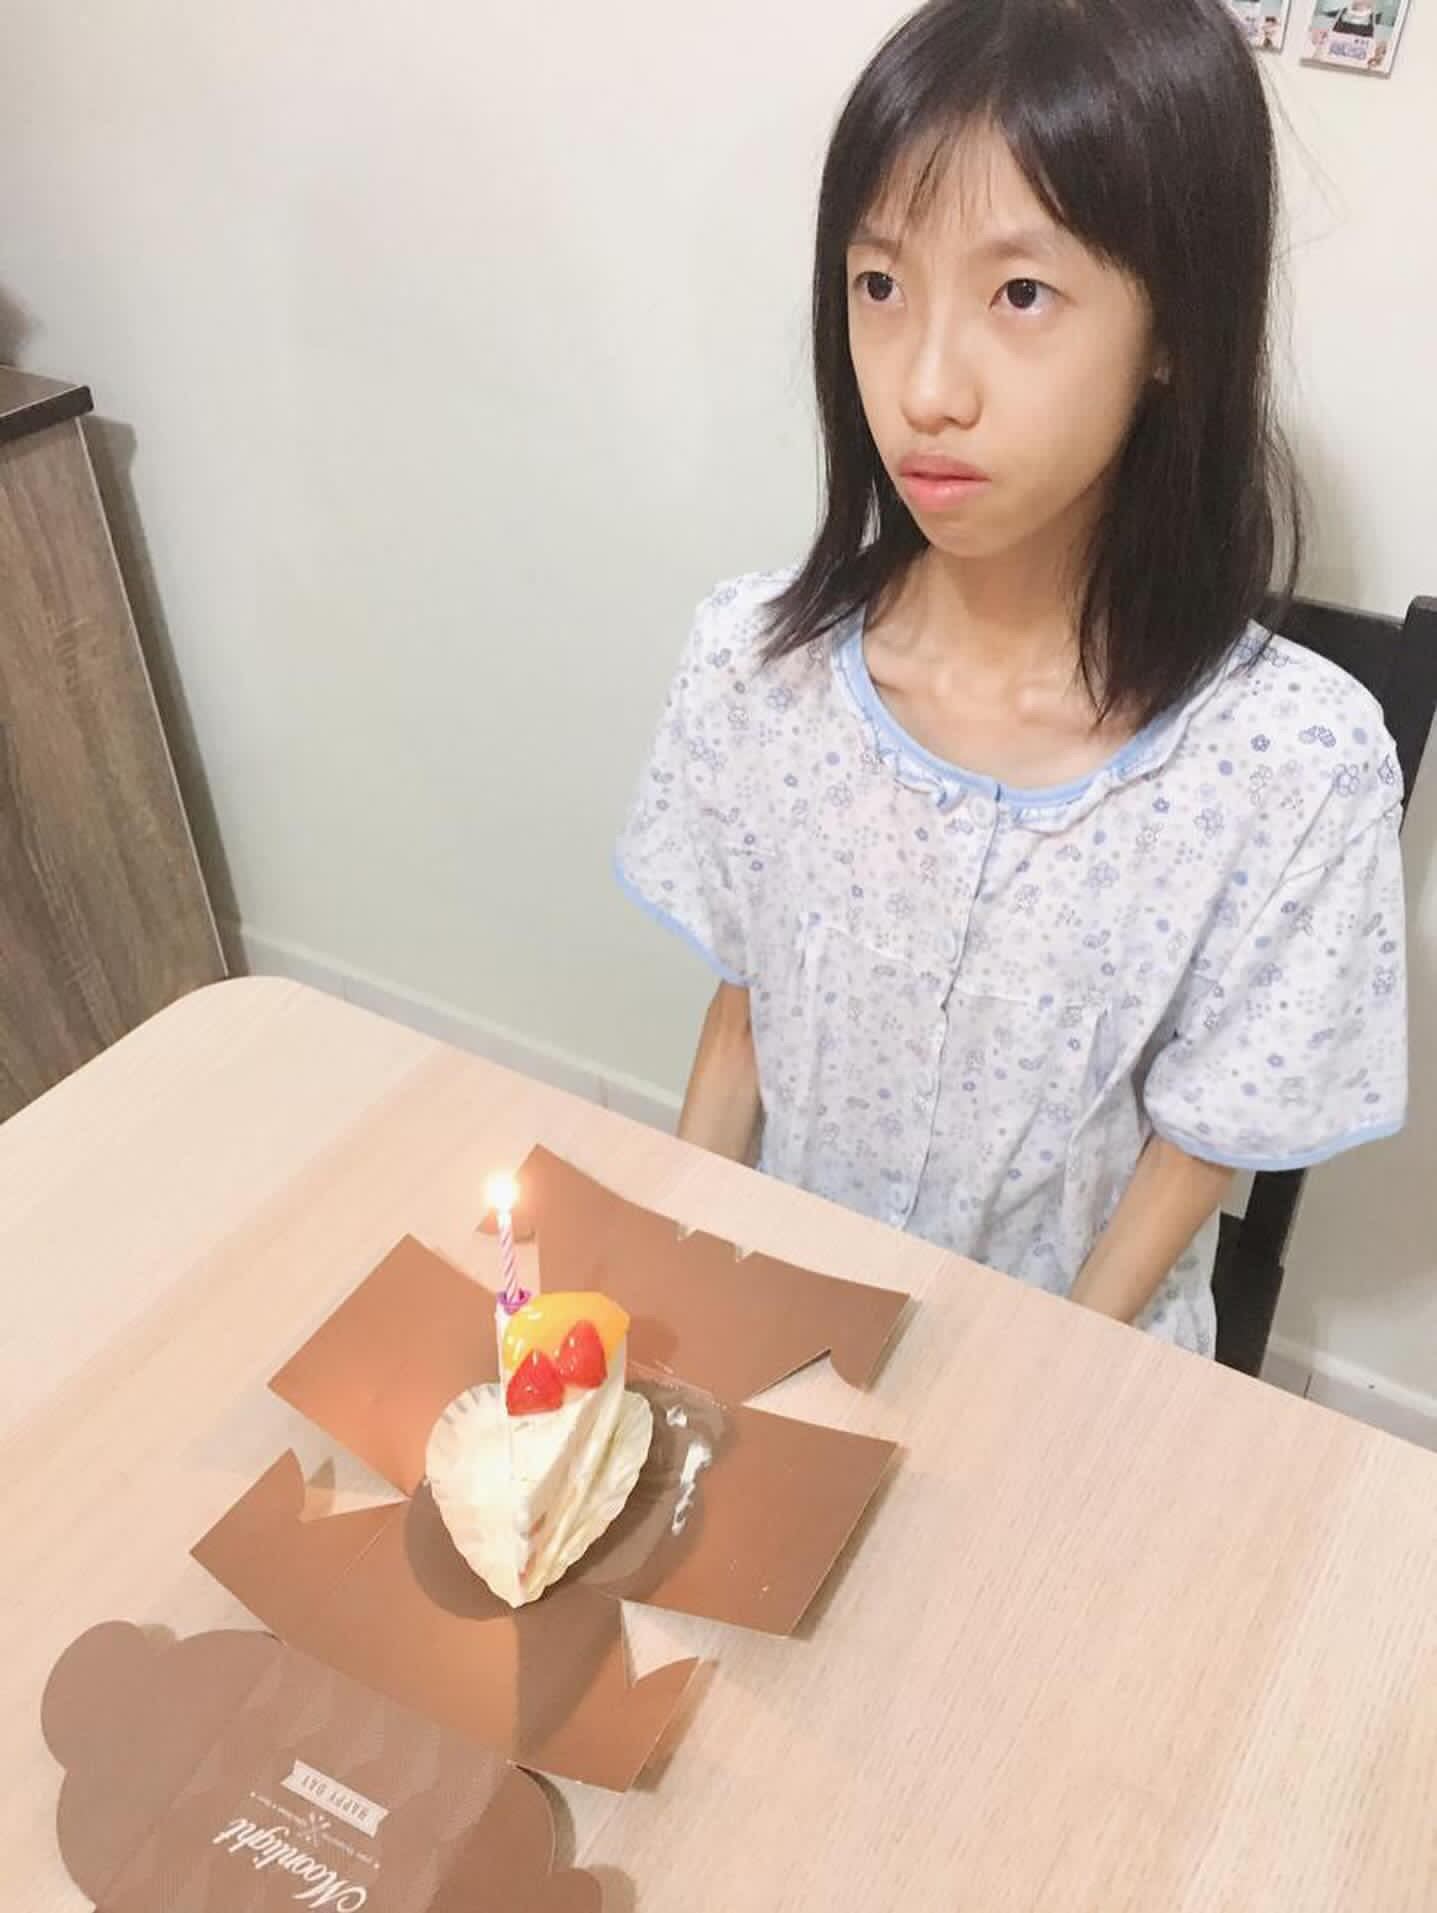 Fion unhappy birthday during anorexia